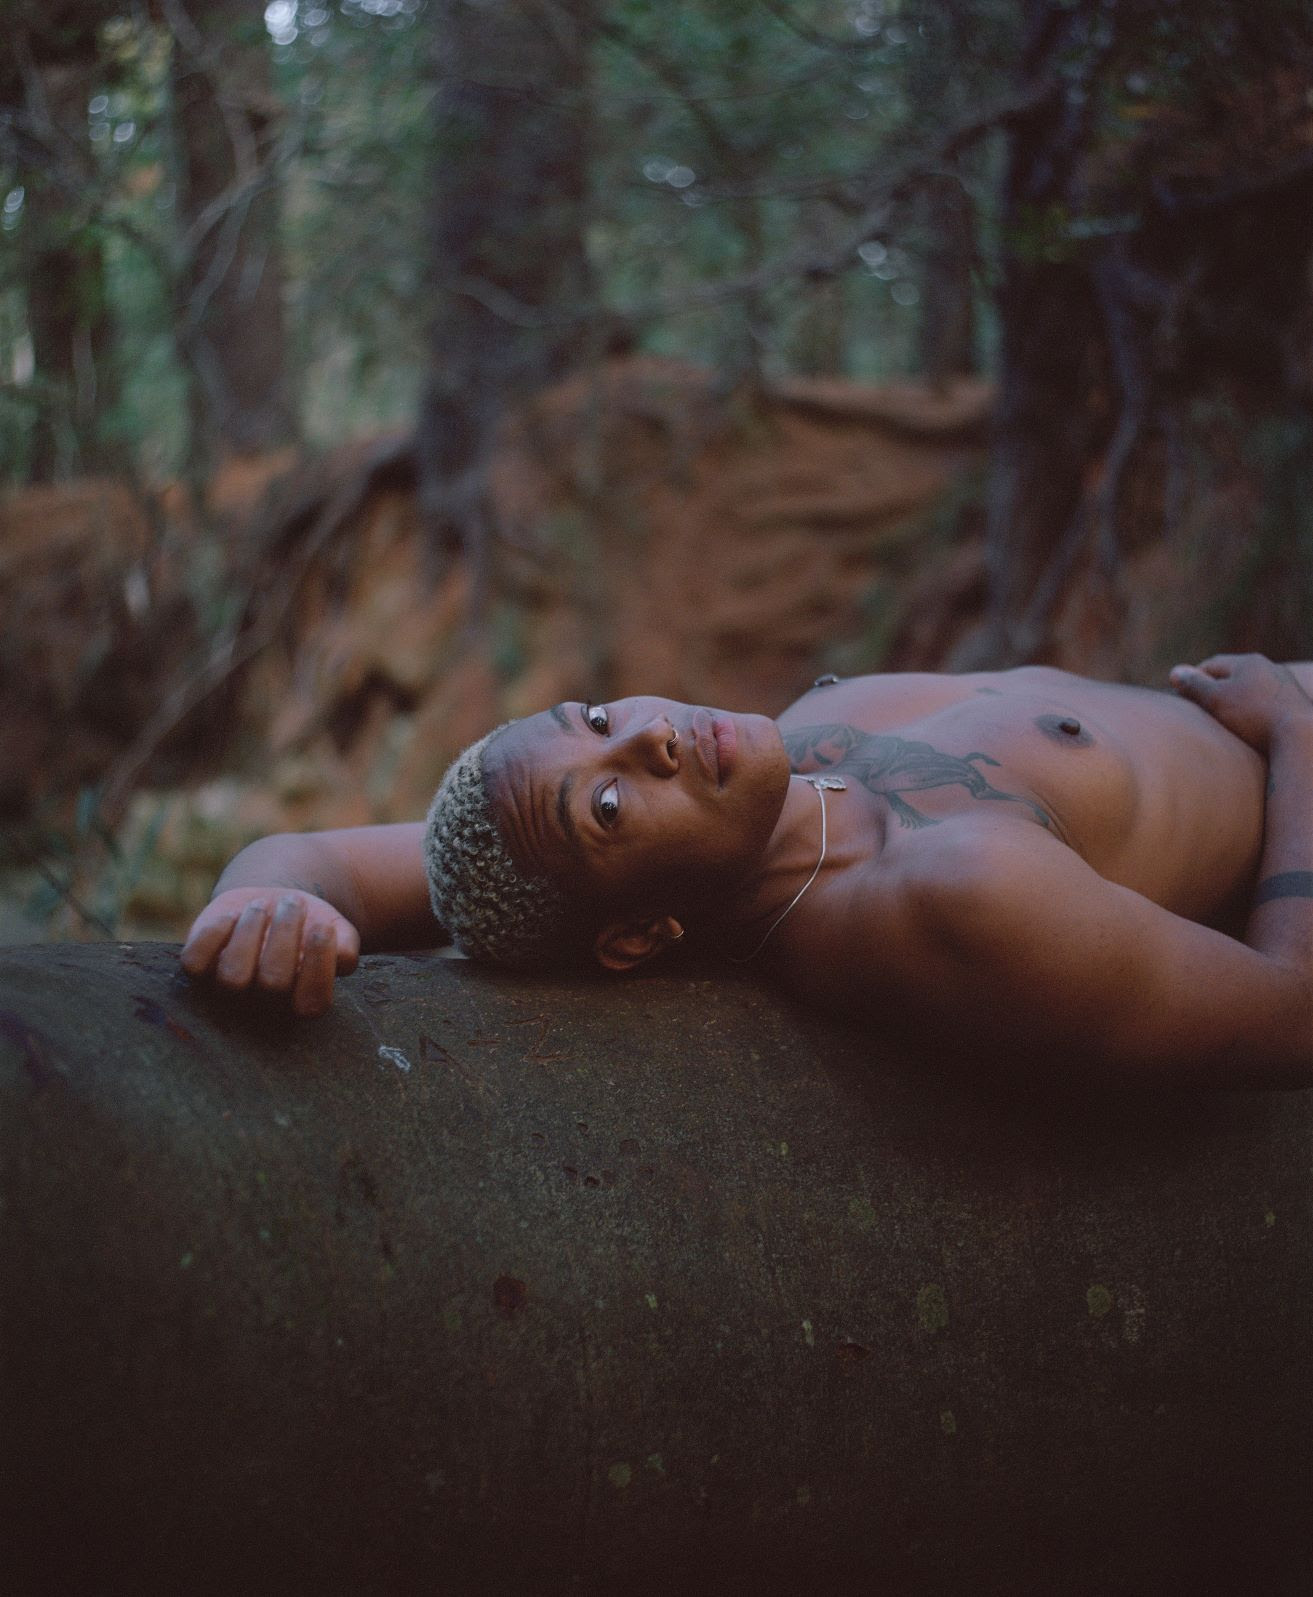 [IMAGE] An individual lies back onto a fallen tree trunk topless in a forest. They are looking straight into the camera and trees and mud are visible in the background.